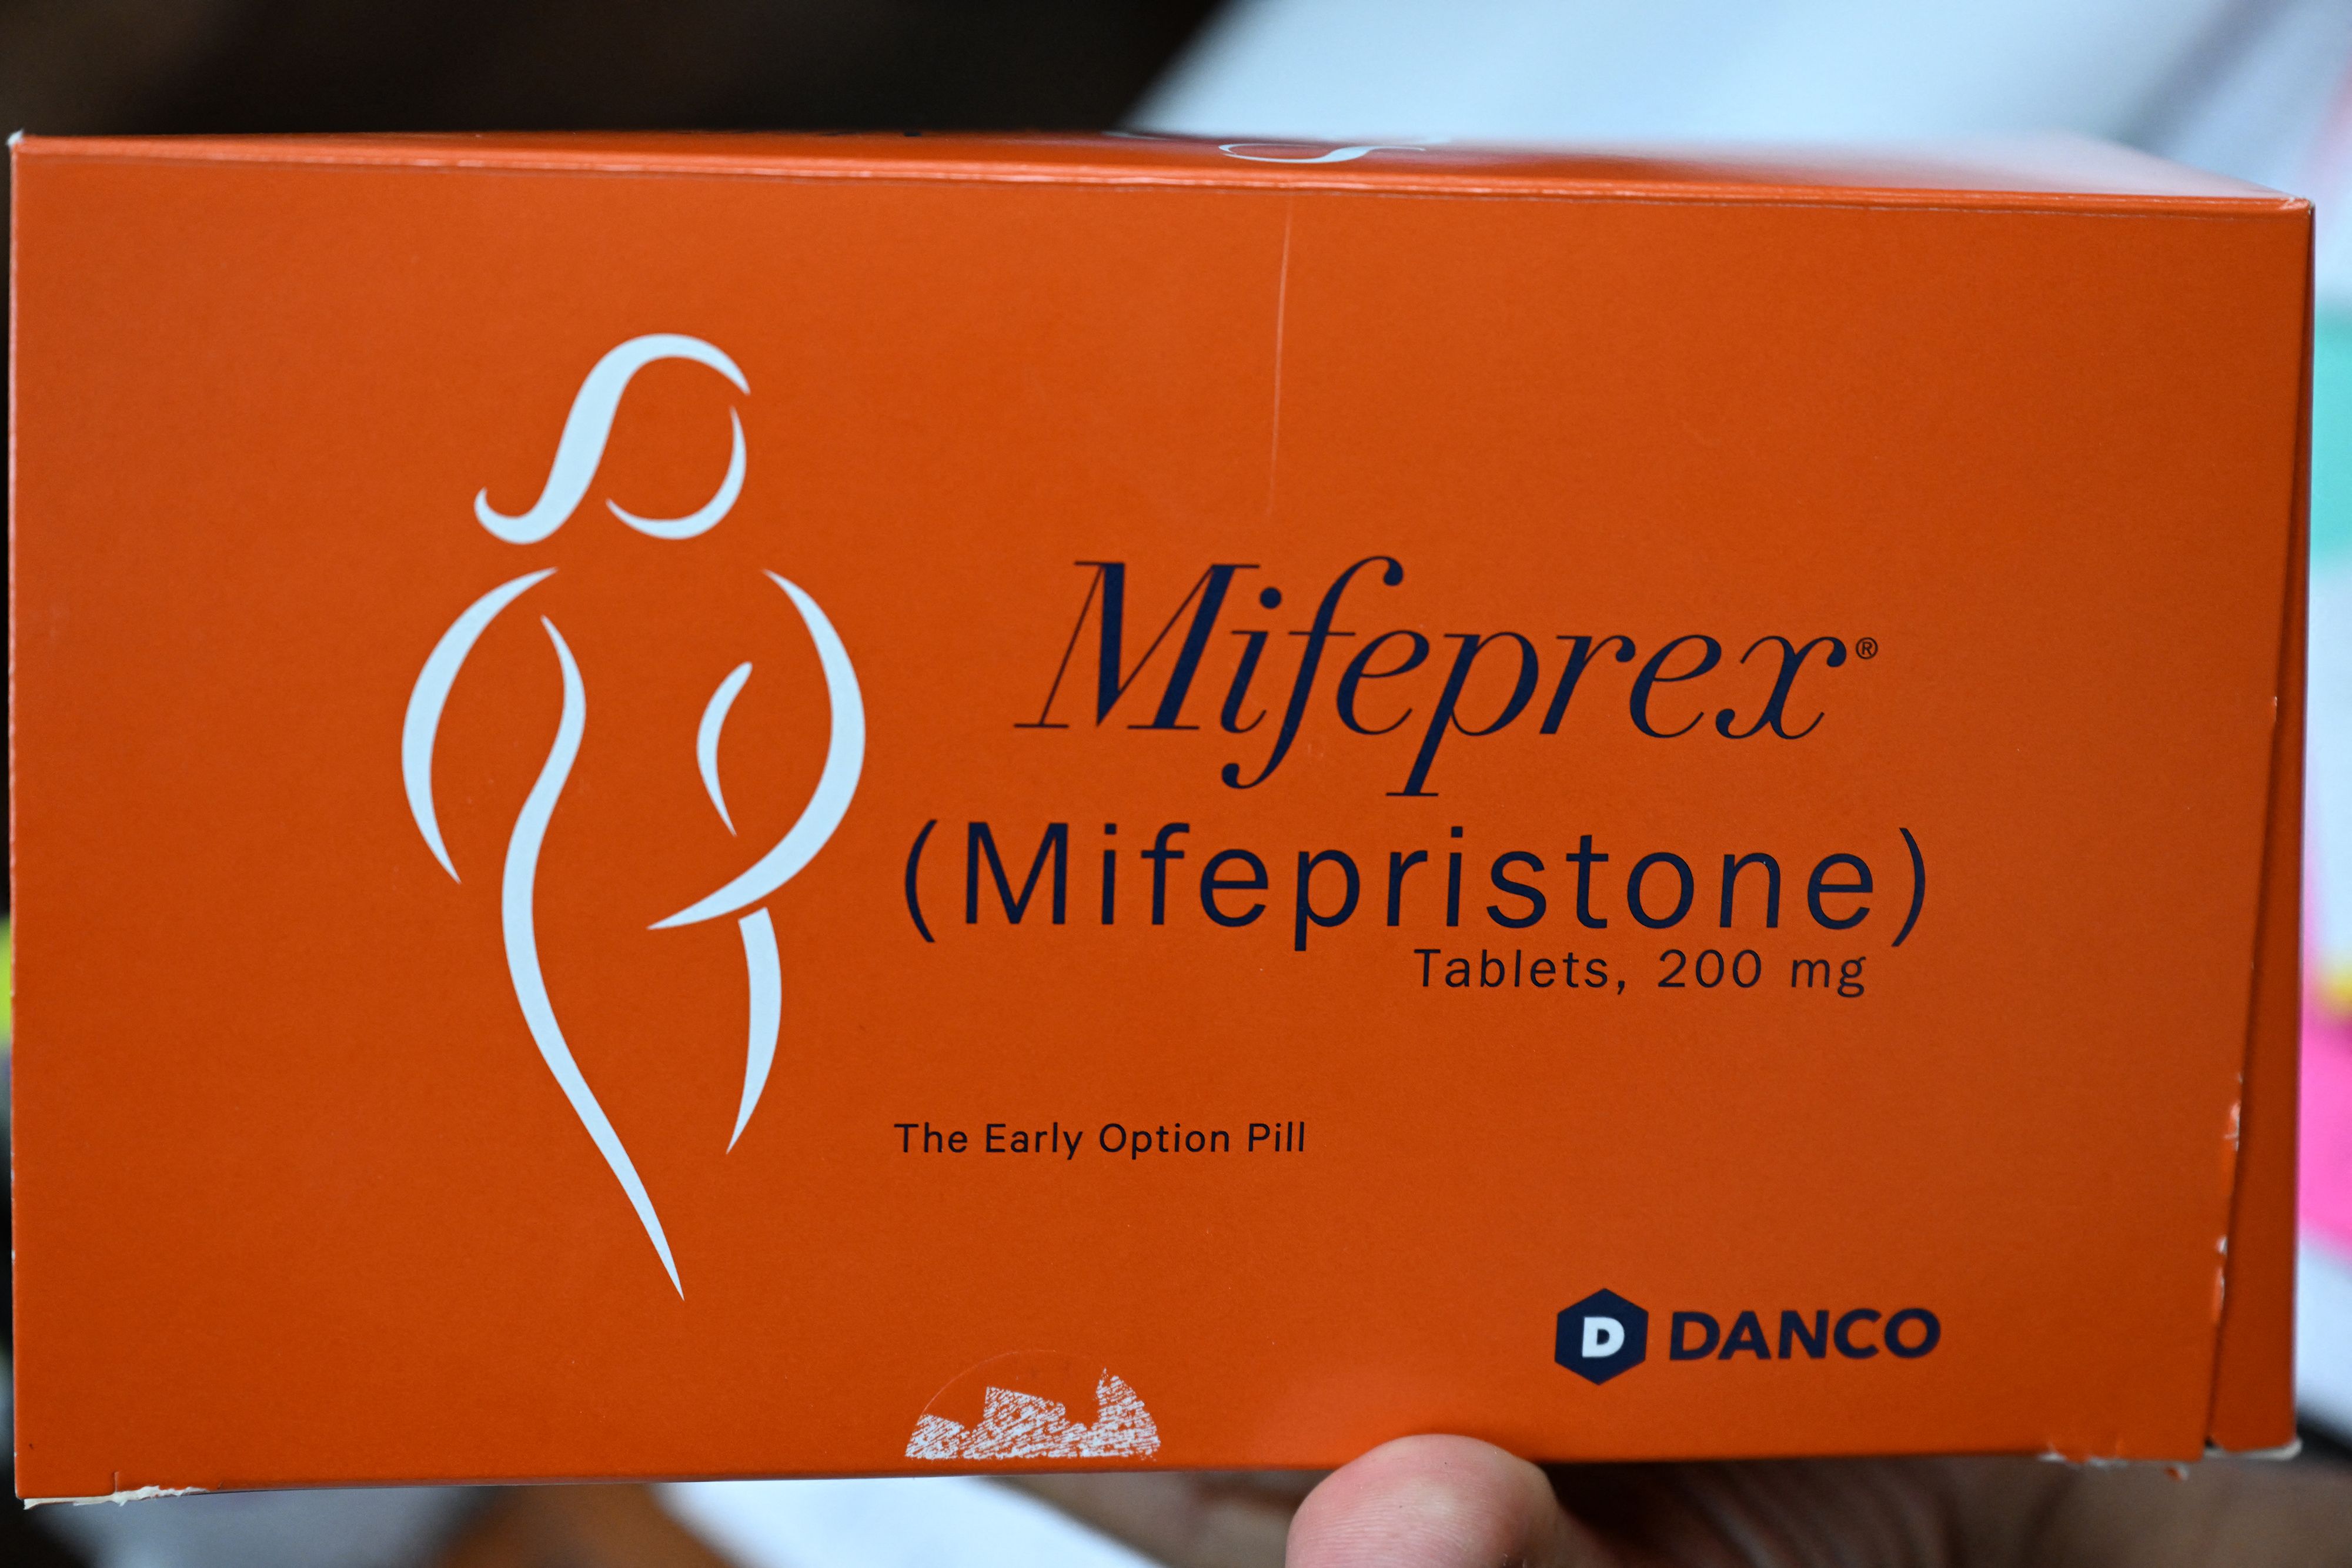 Mifepristone (brand name Mifeprex), one of the two drugs used in a medication abortion, is displayed at the Women's Reproductive Clinic in Santa Teresa, New Mexico, June 15, 2022.